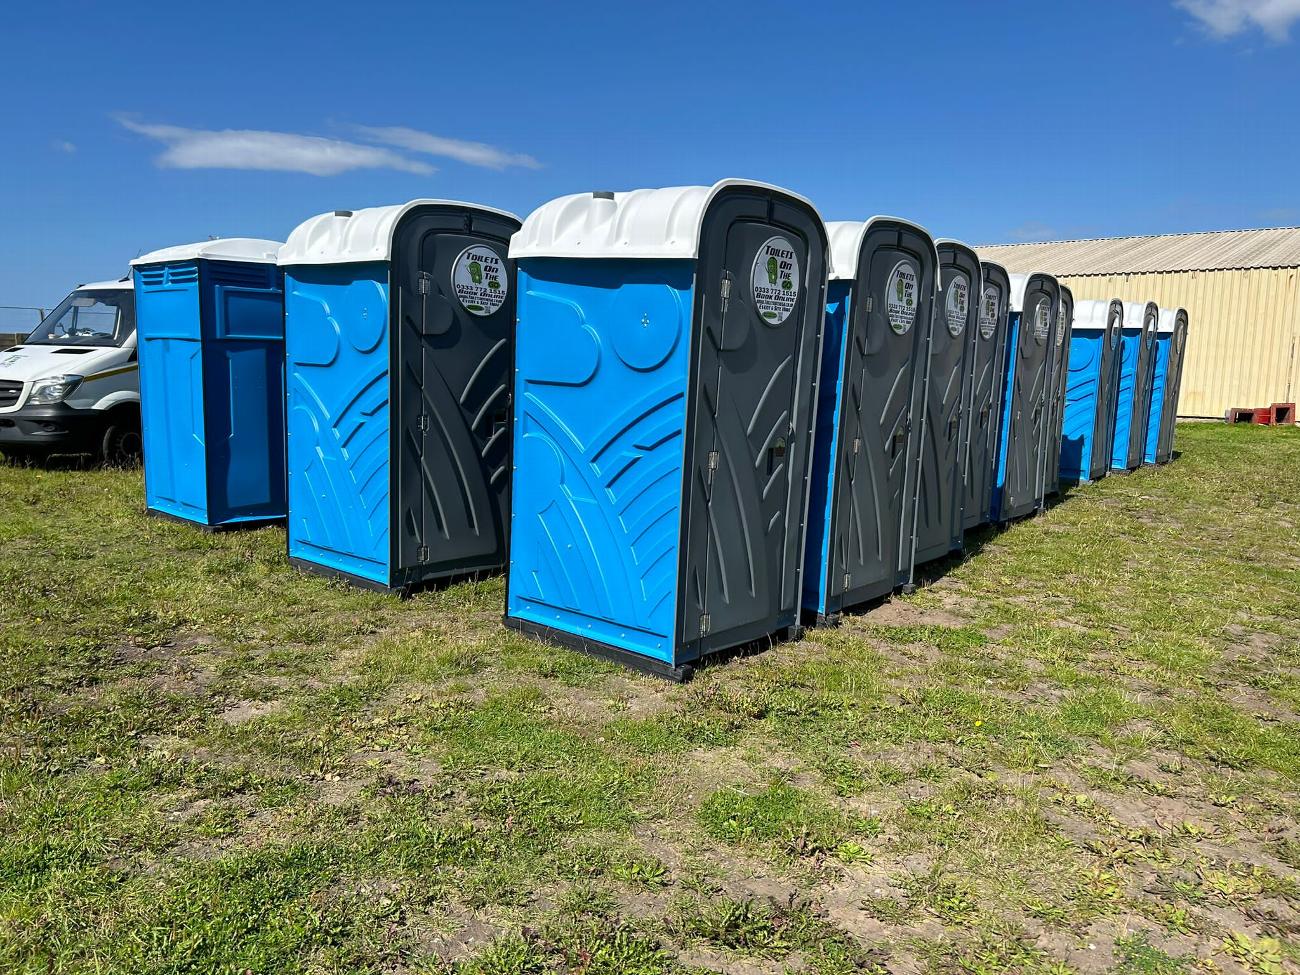 Gallery | Portable Toilet Loo Hire Rental Company in North West uk and Manchester gallery image 51